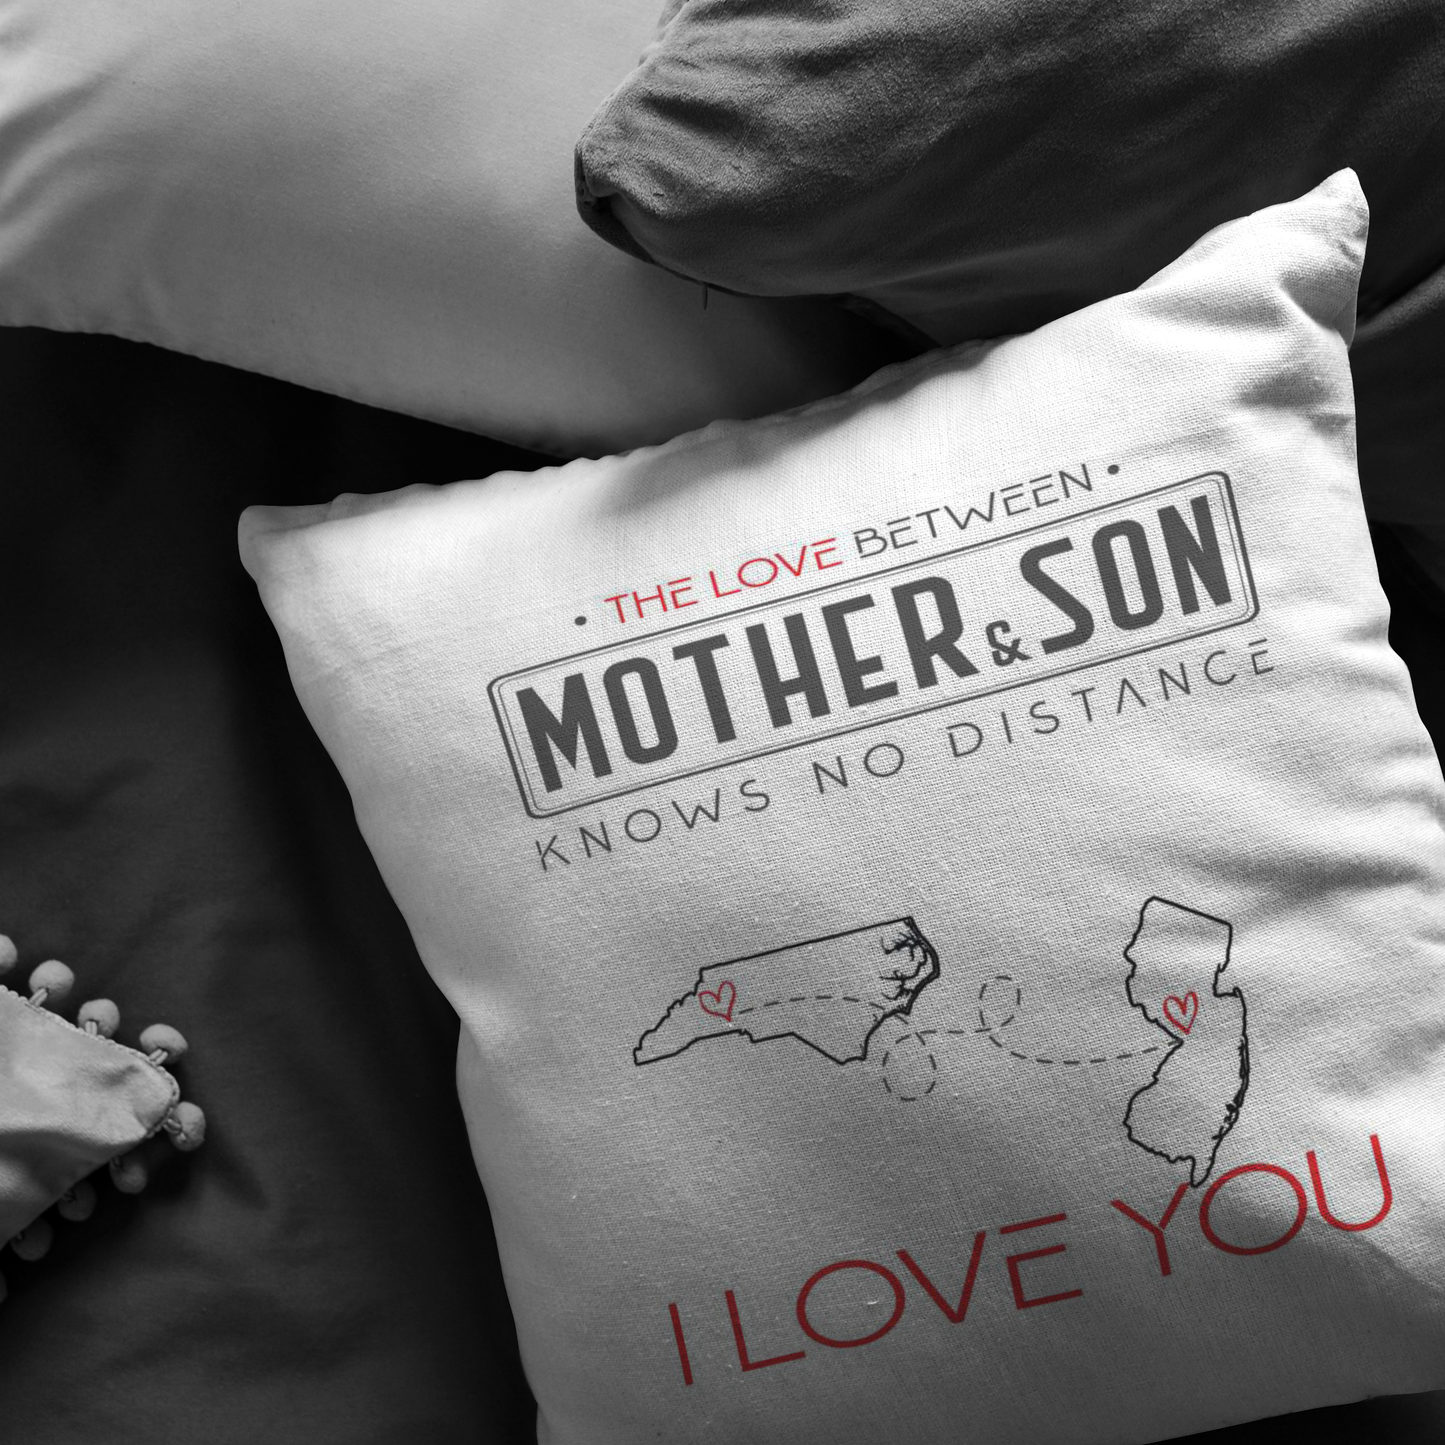 ND-pl20419825-sp-23883 - [ North Carolina | New Jersey | 1 ]Mothers Day Gifts From Son - The Love Between Mother  Son